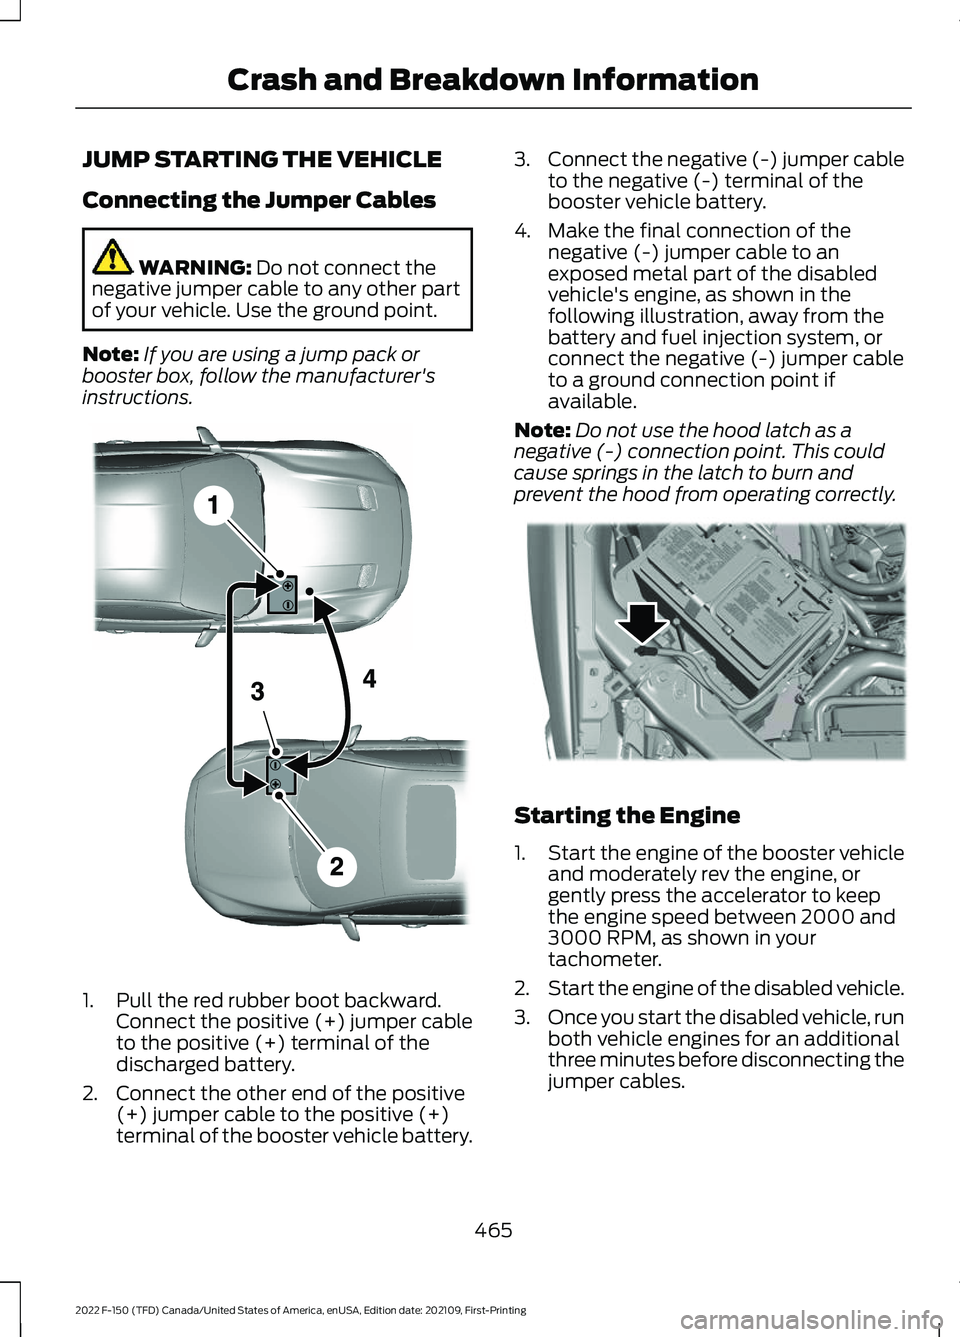 FORD F-150 2022  Owners Manual JUMP STARTING THE VEHICLE
Connecting the Jumper Cables
WARNING: Do not connect the
negative jumper cable to any other part
of your vehicle. Use the ground point.
Note: If you are using a jump pack or
